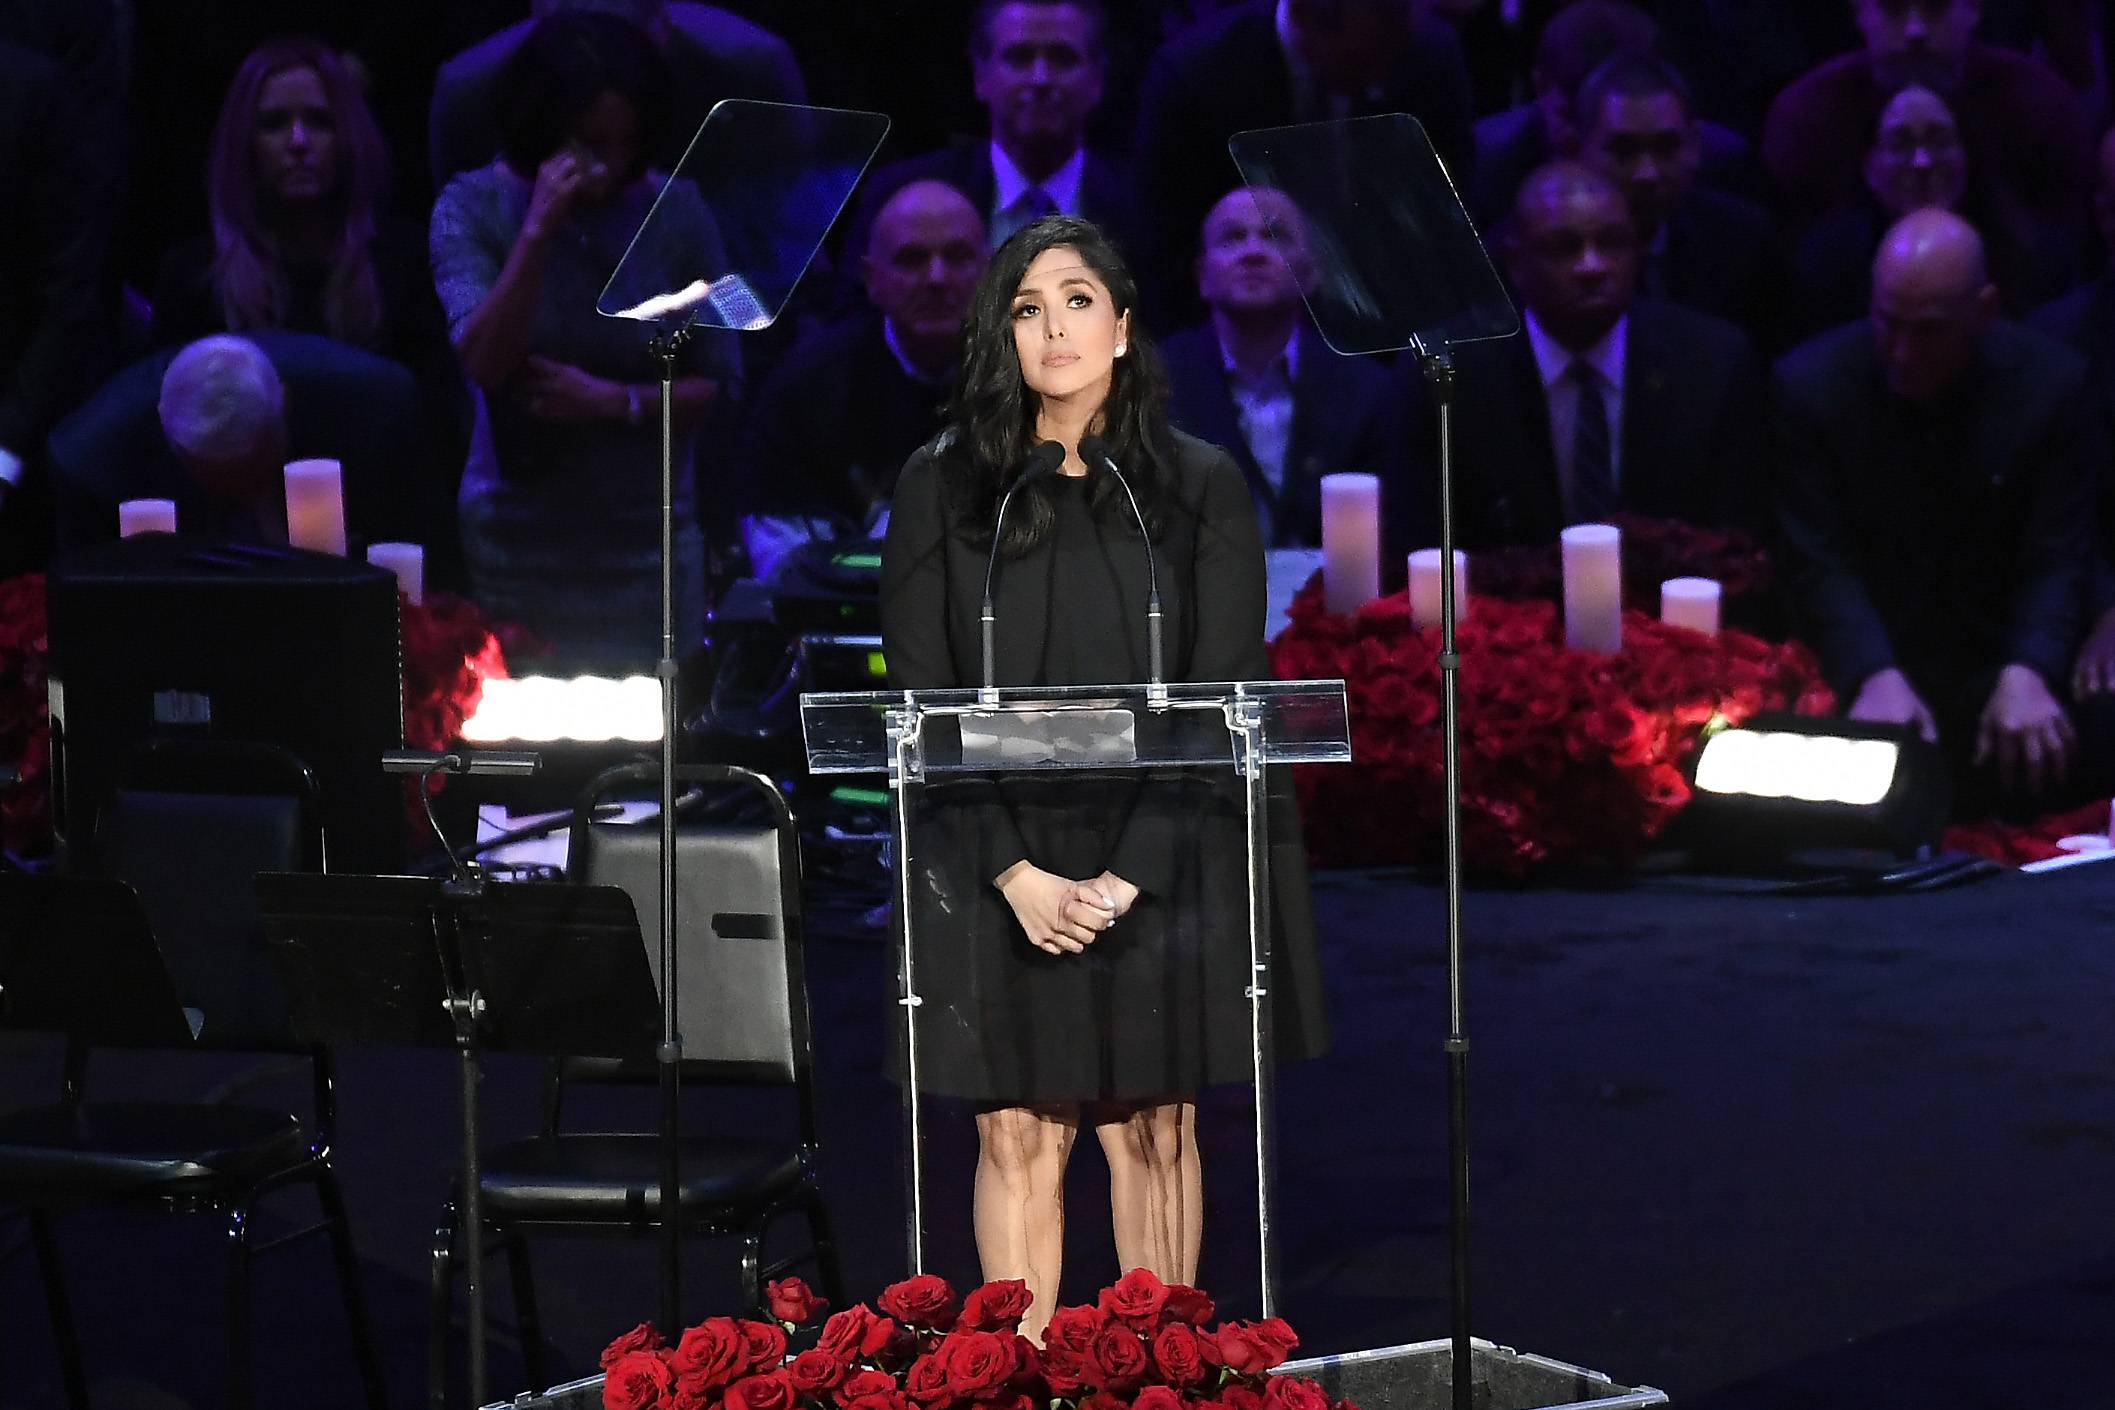 LOS ANGELES, CALIFORNIA - FEBRUARY 24: Vanessa Bryant speaks during The Celebration of Life for Kobe & Gianna Bryant at Staples Center on February 24, 2020 in Los Angeles, California. (Photo by Kevork Djansezian/Getty Images)